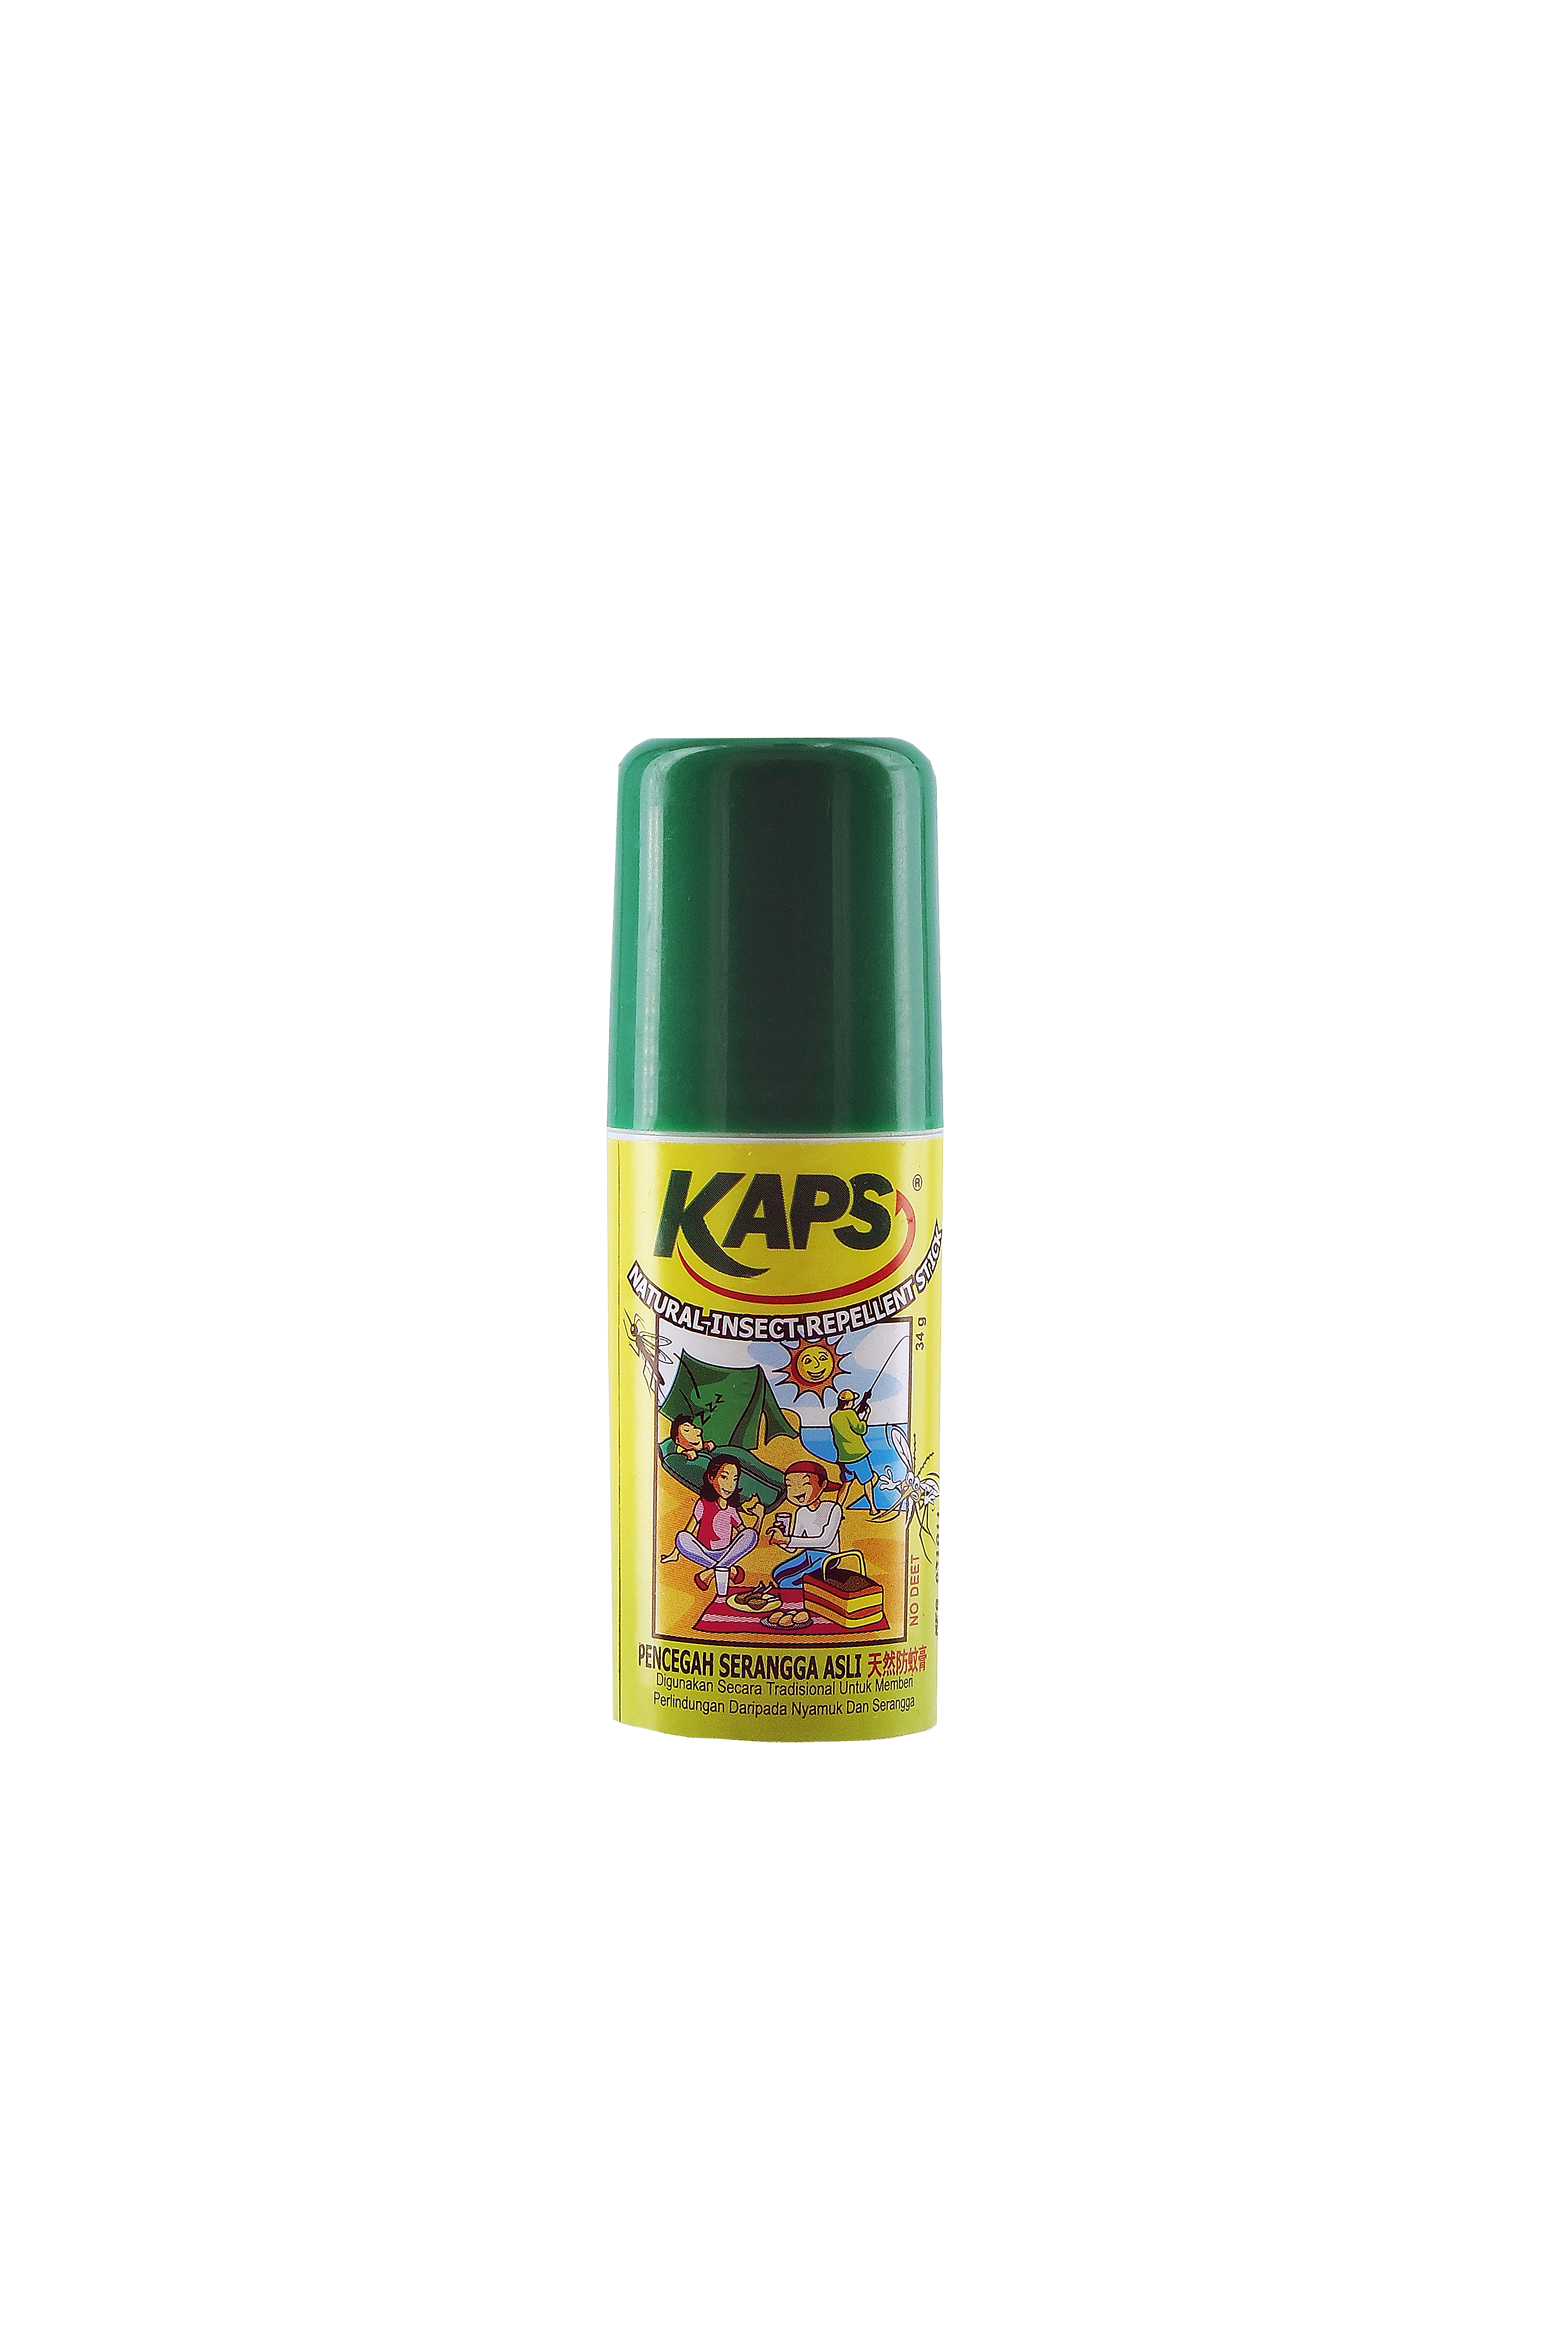 kaps-natural-insect-repellent-stick-34g